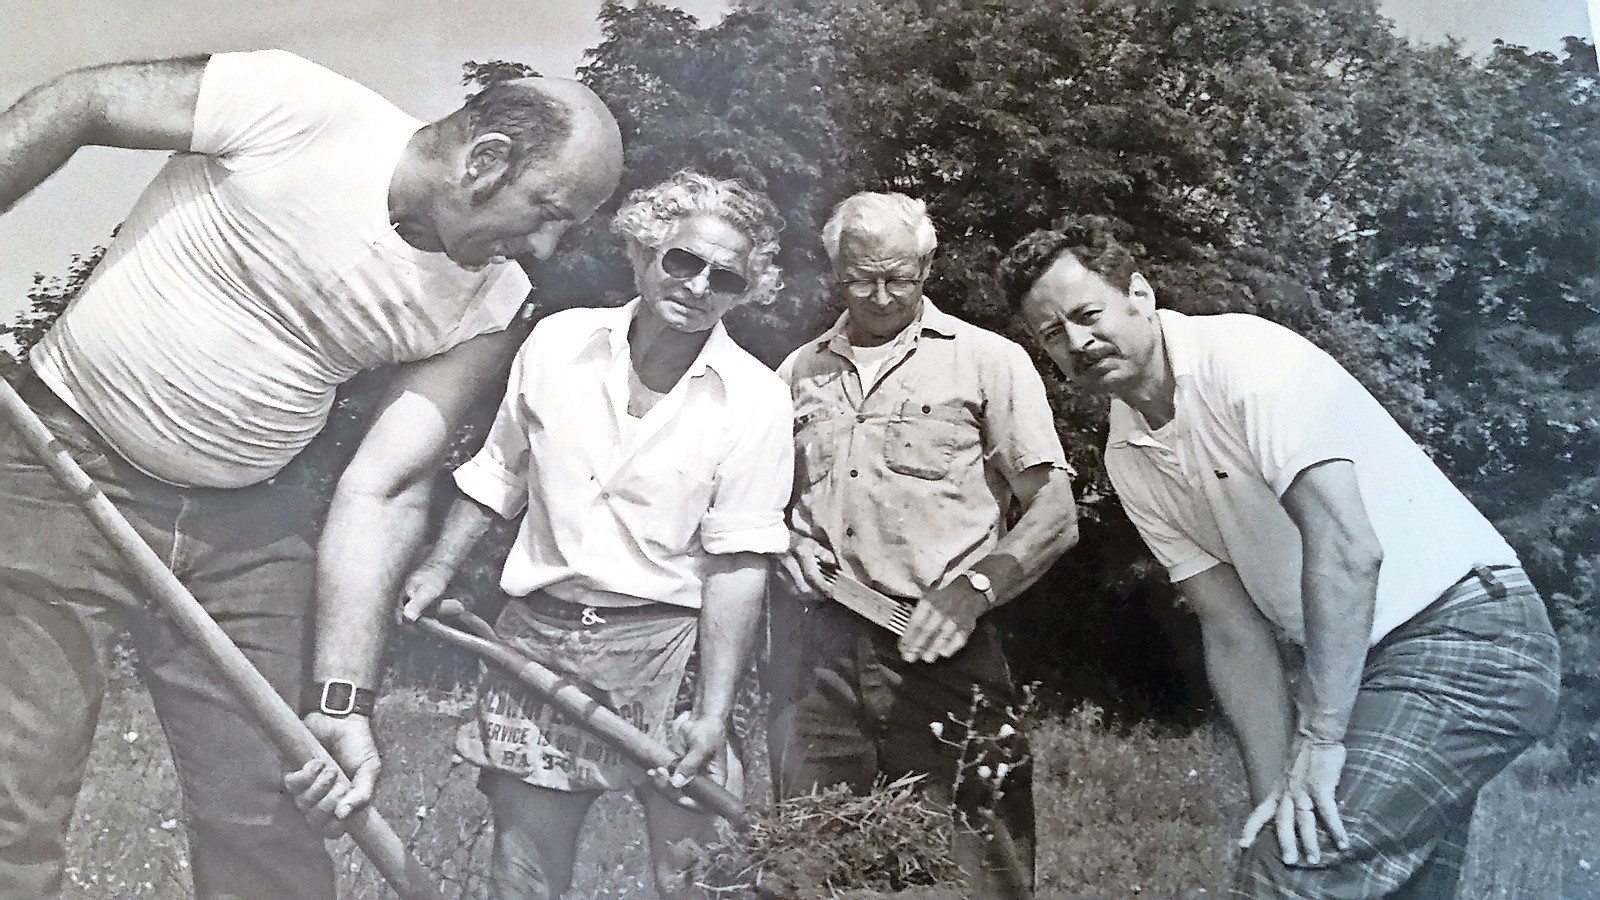 Baldwin Historical Society founders, from left, Jim Moreland, Al Fam, James McKeon and Rolf Mahler broke ground on the museum on July 10, 1976.